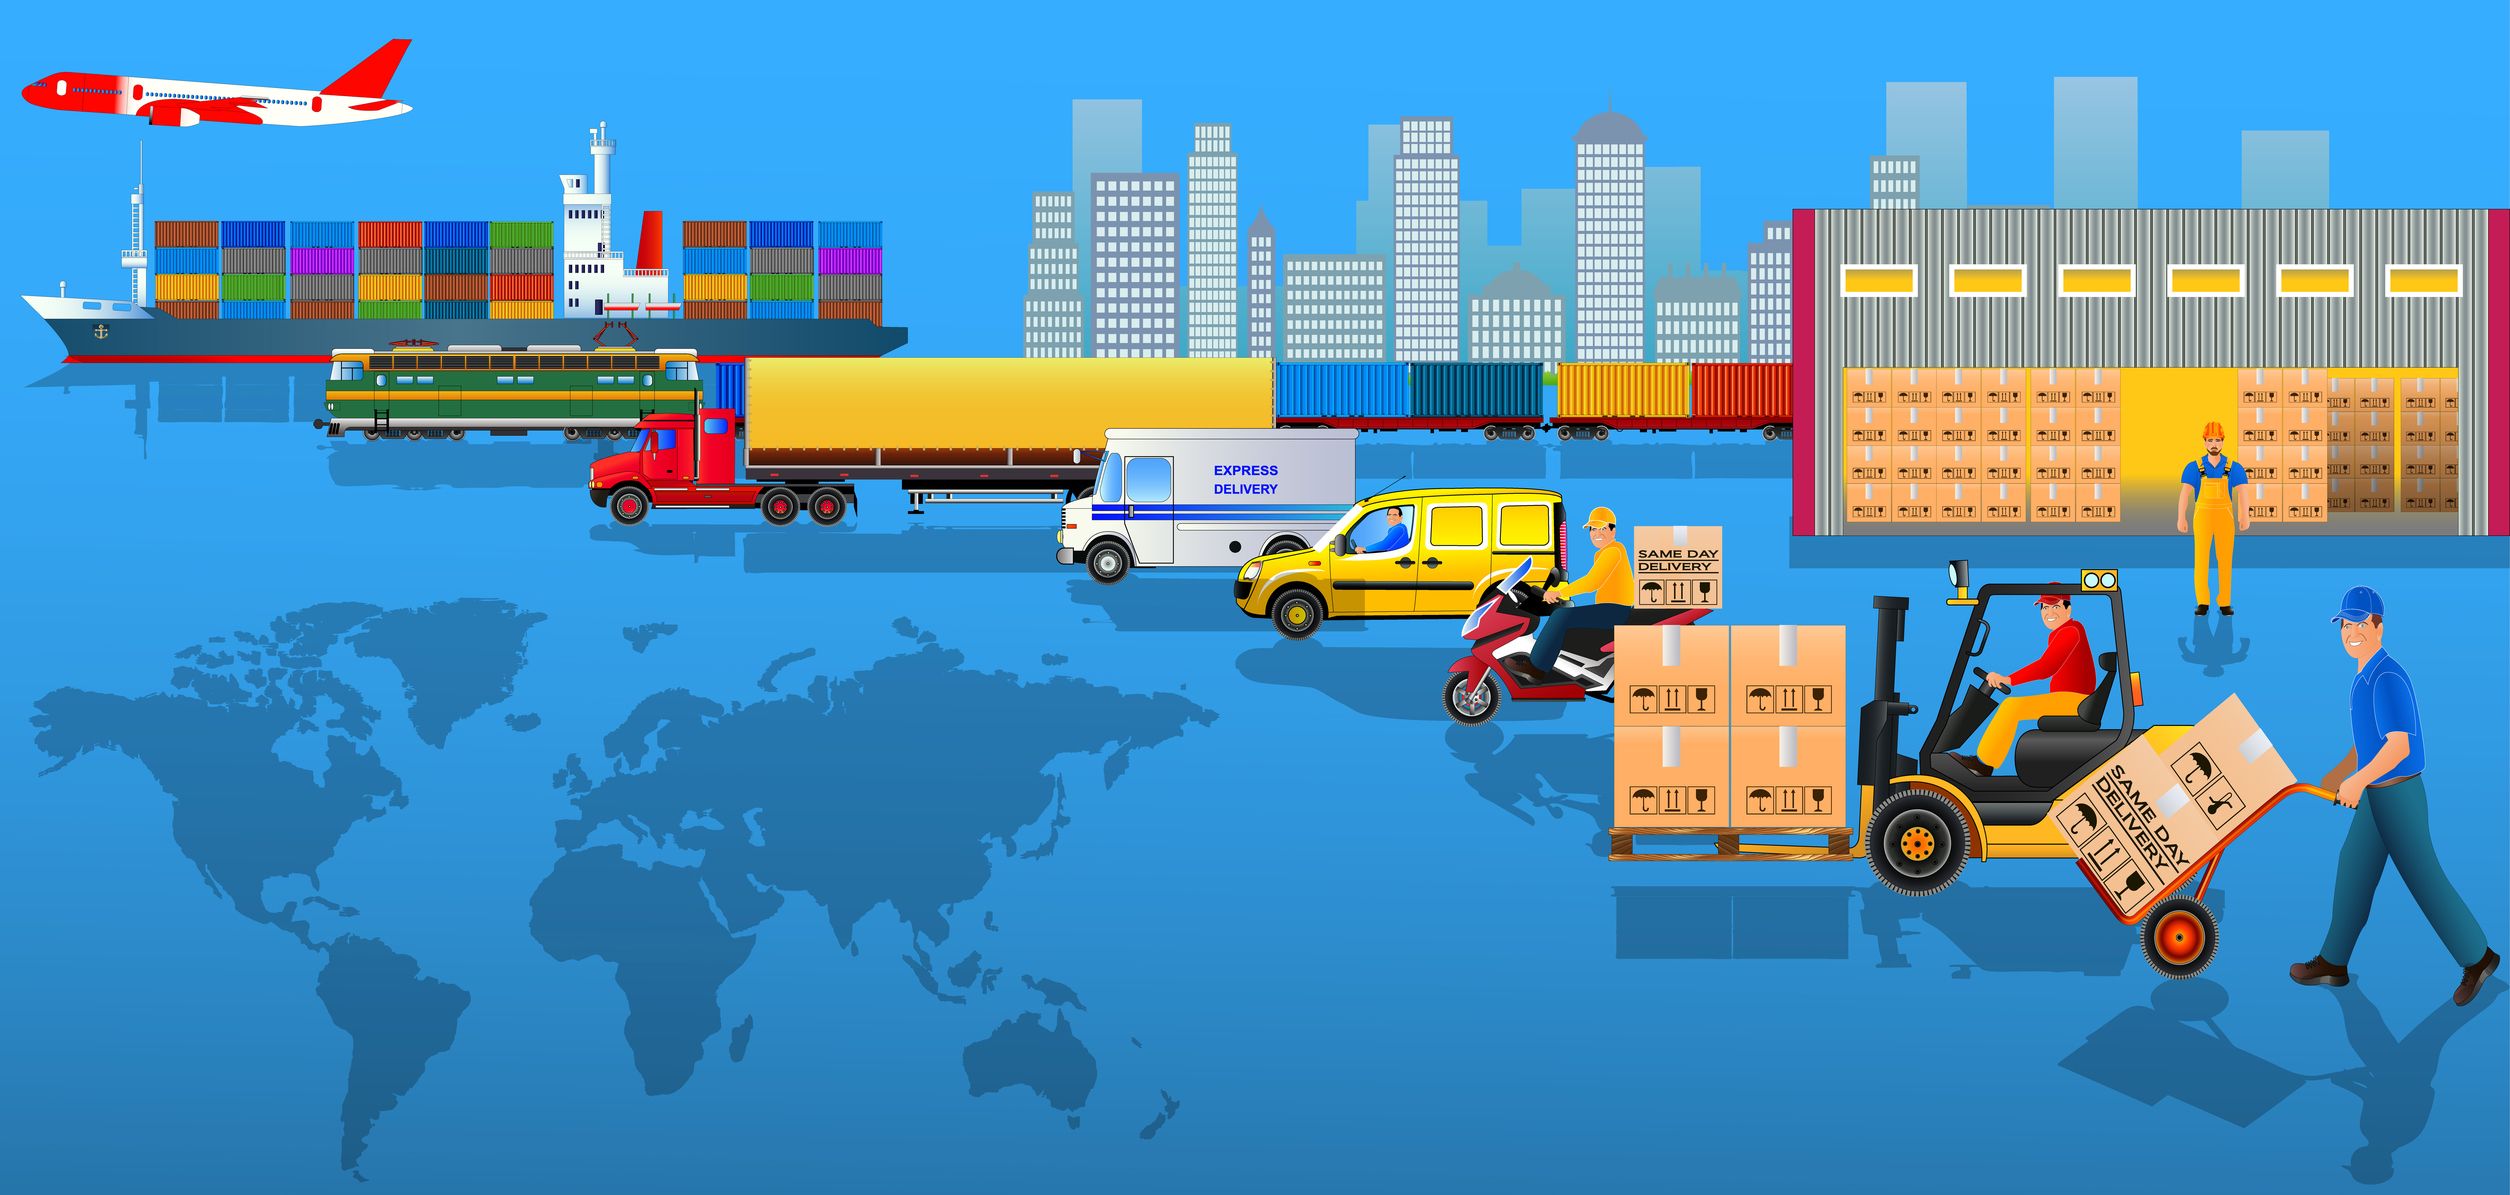 Container lines get closer to customers with logistics, but may not suit all!